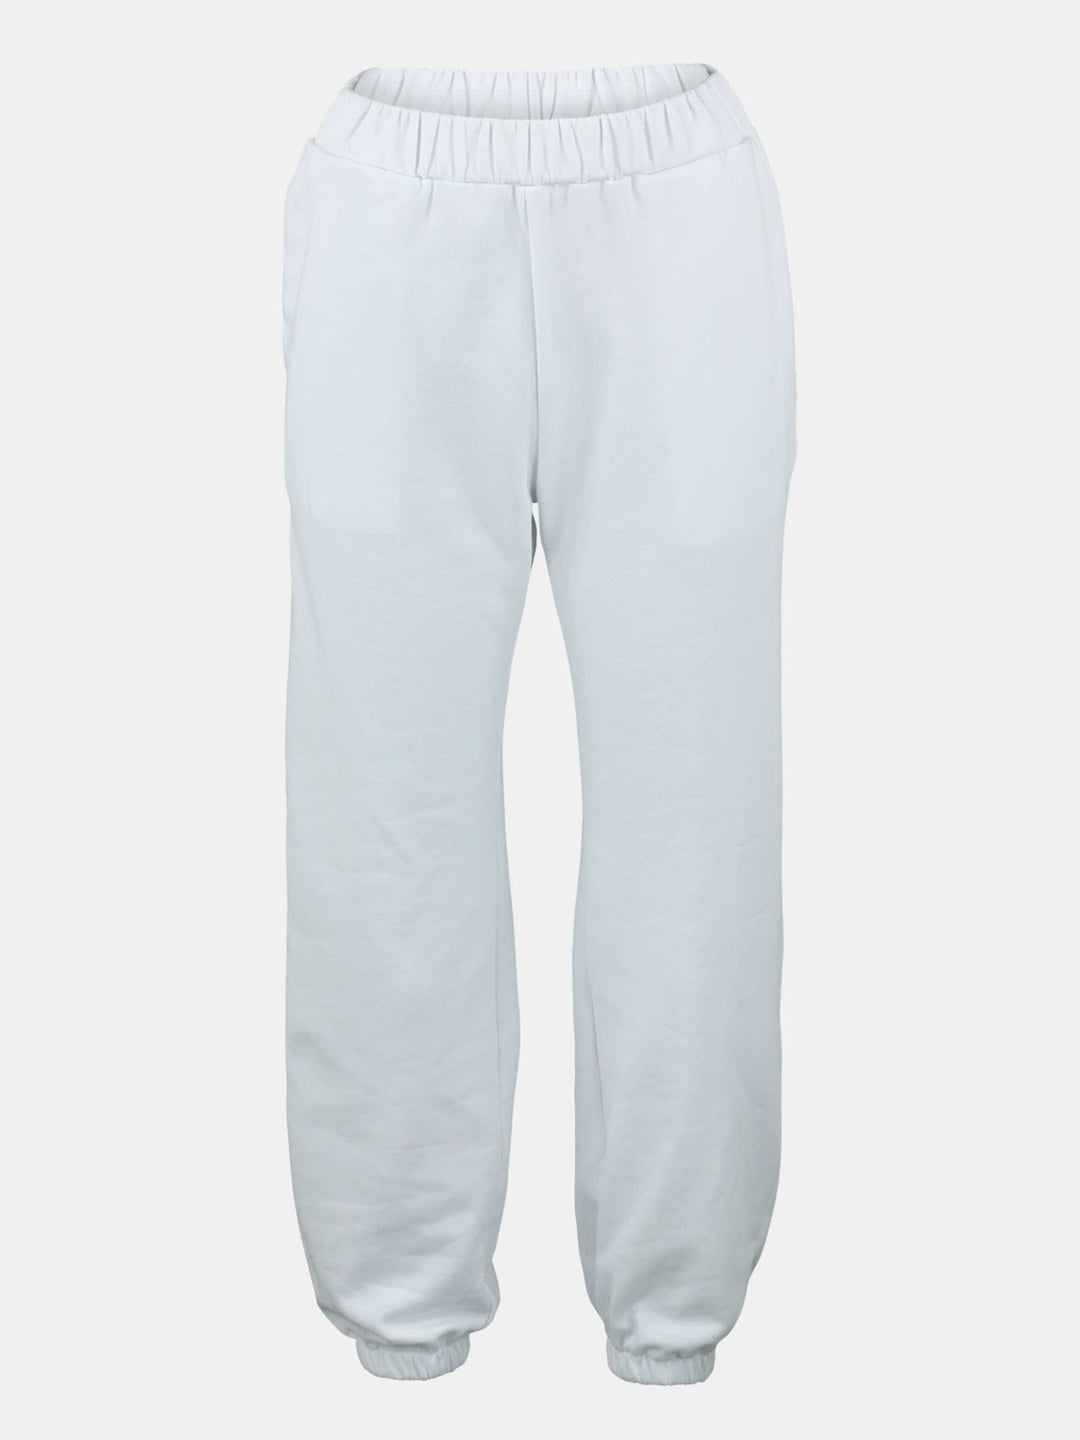 Casual High Waist Athletic Pants White Ghost | Jolovies